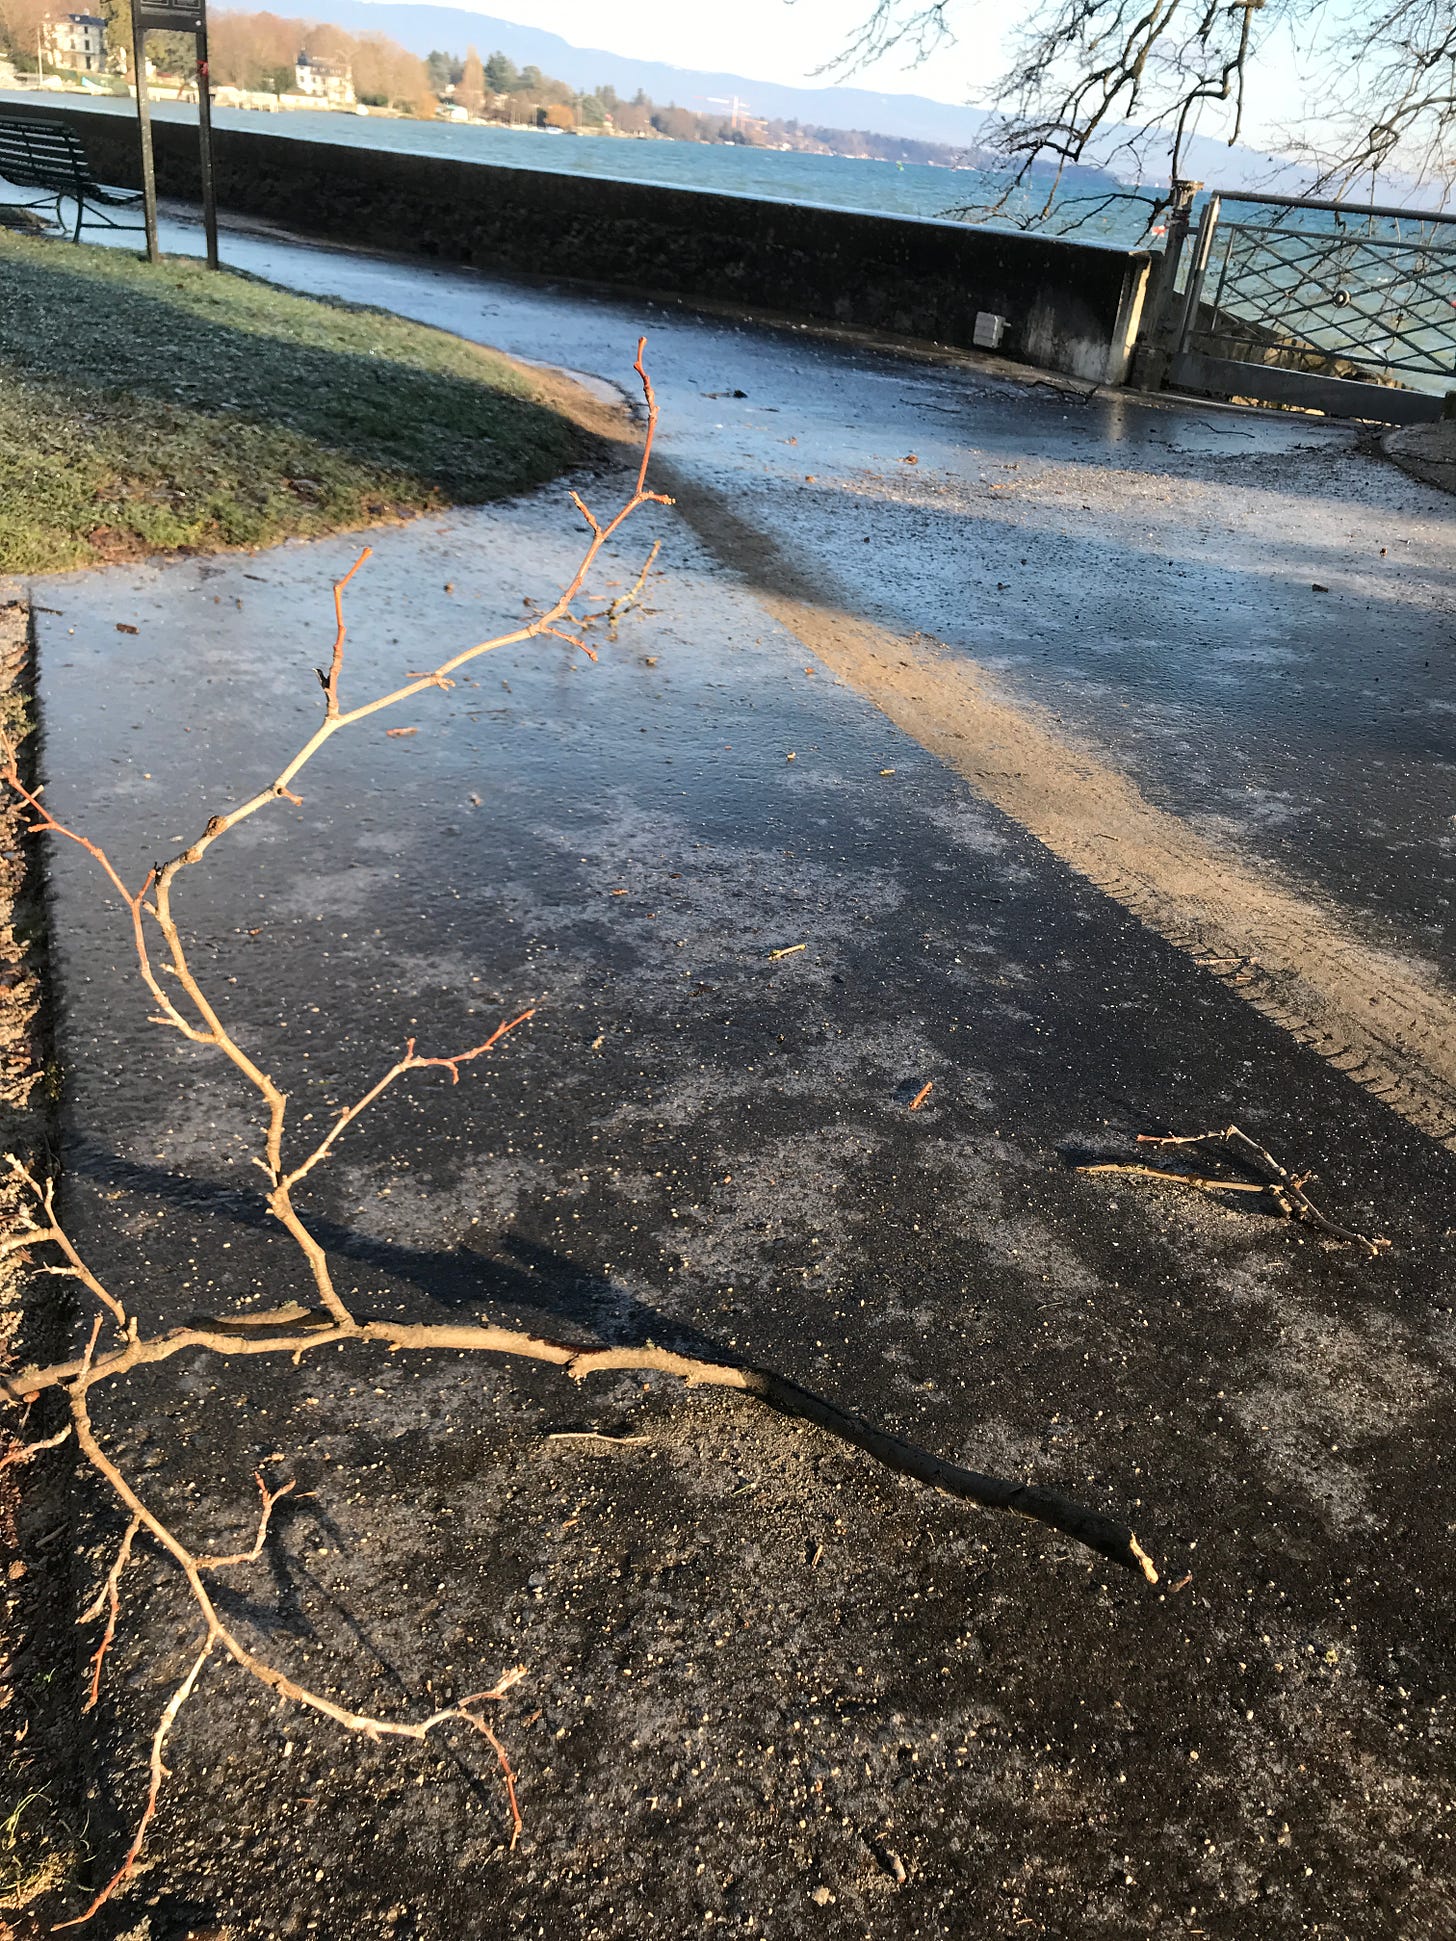 Tree debris left on the ground after a storm. The ground is icy.